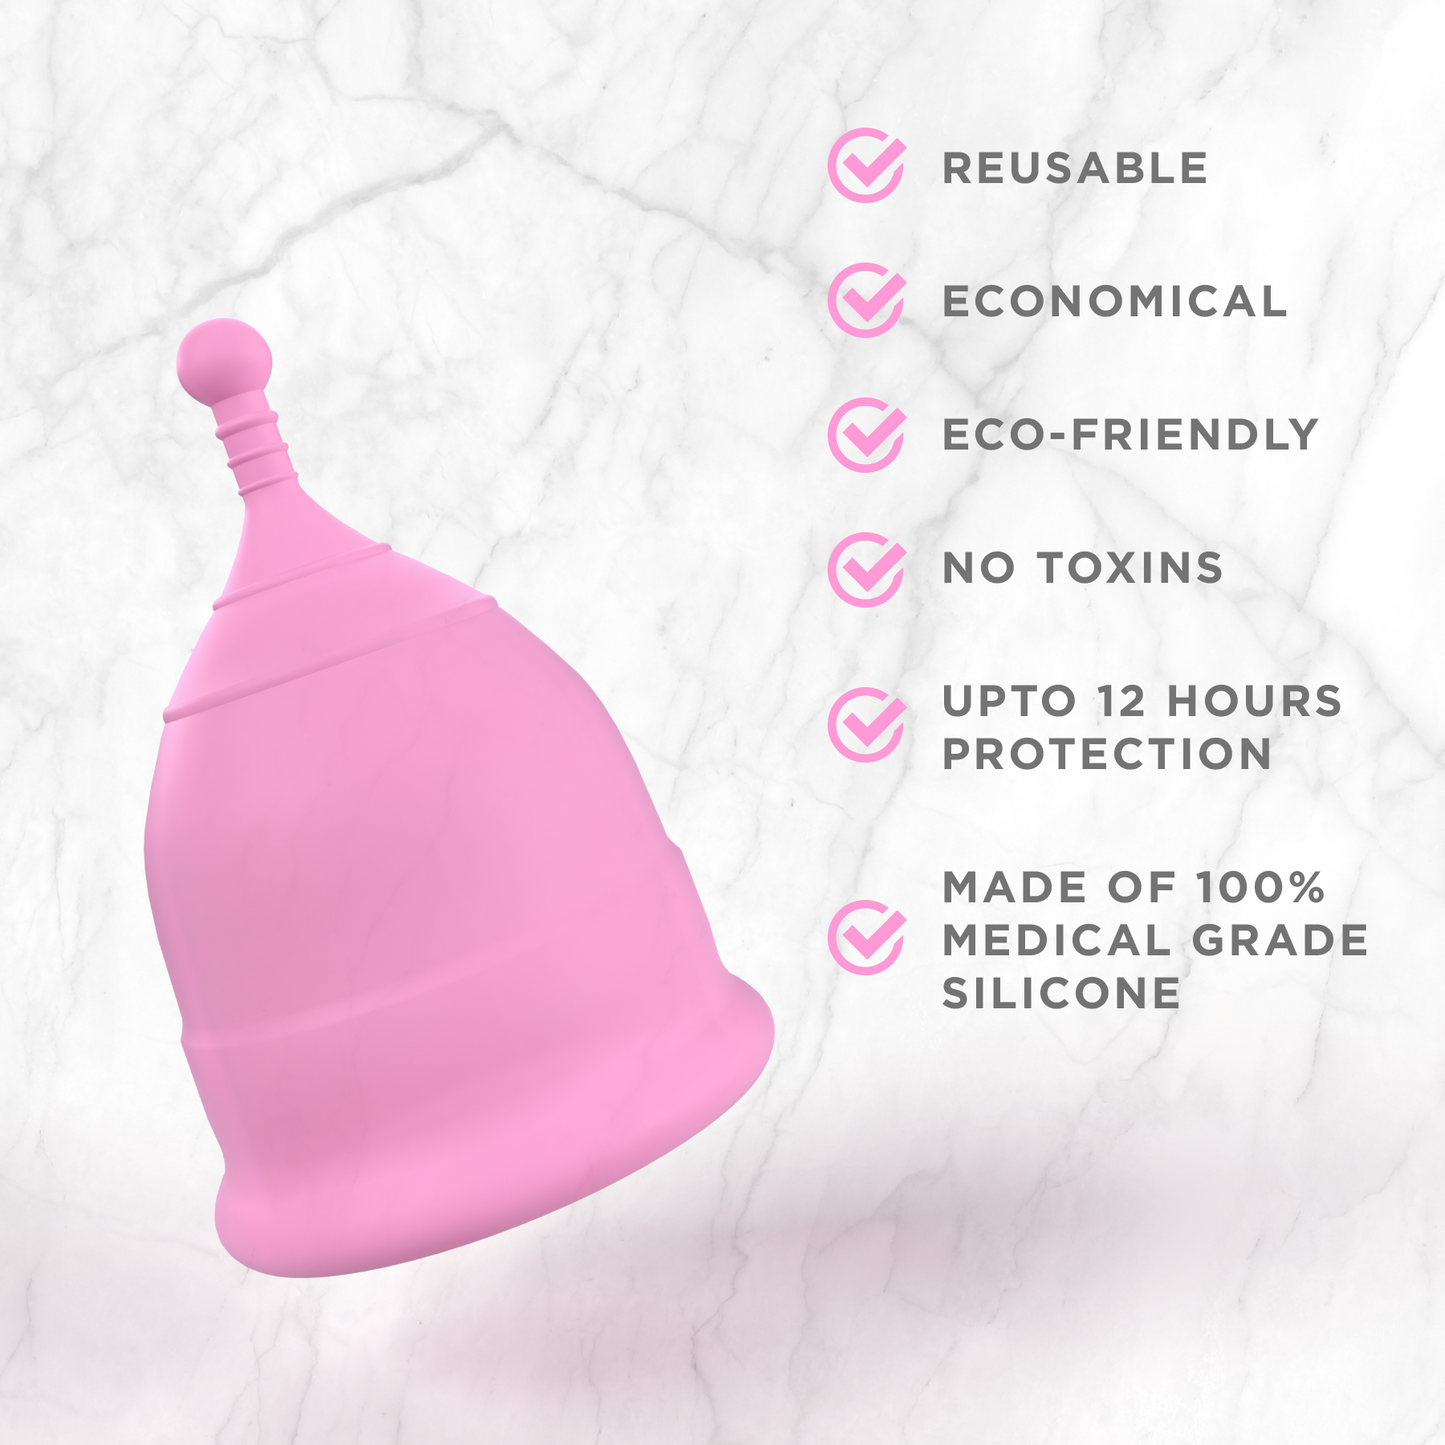 Pee Safe Reusable Menstrual Cup with Medical Grade Silcone for Women - Small